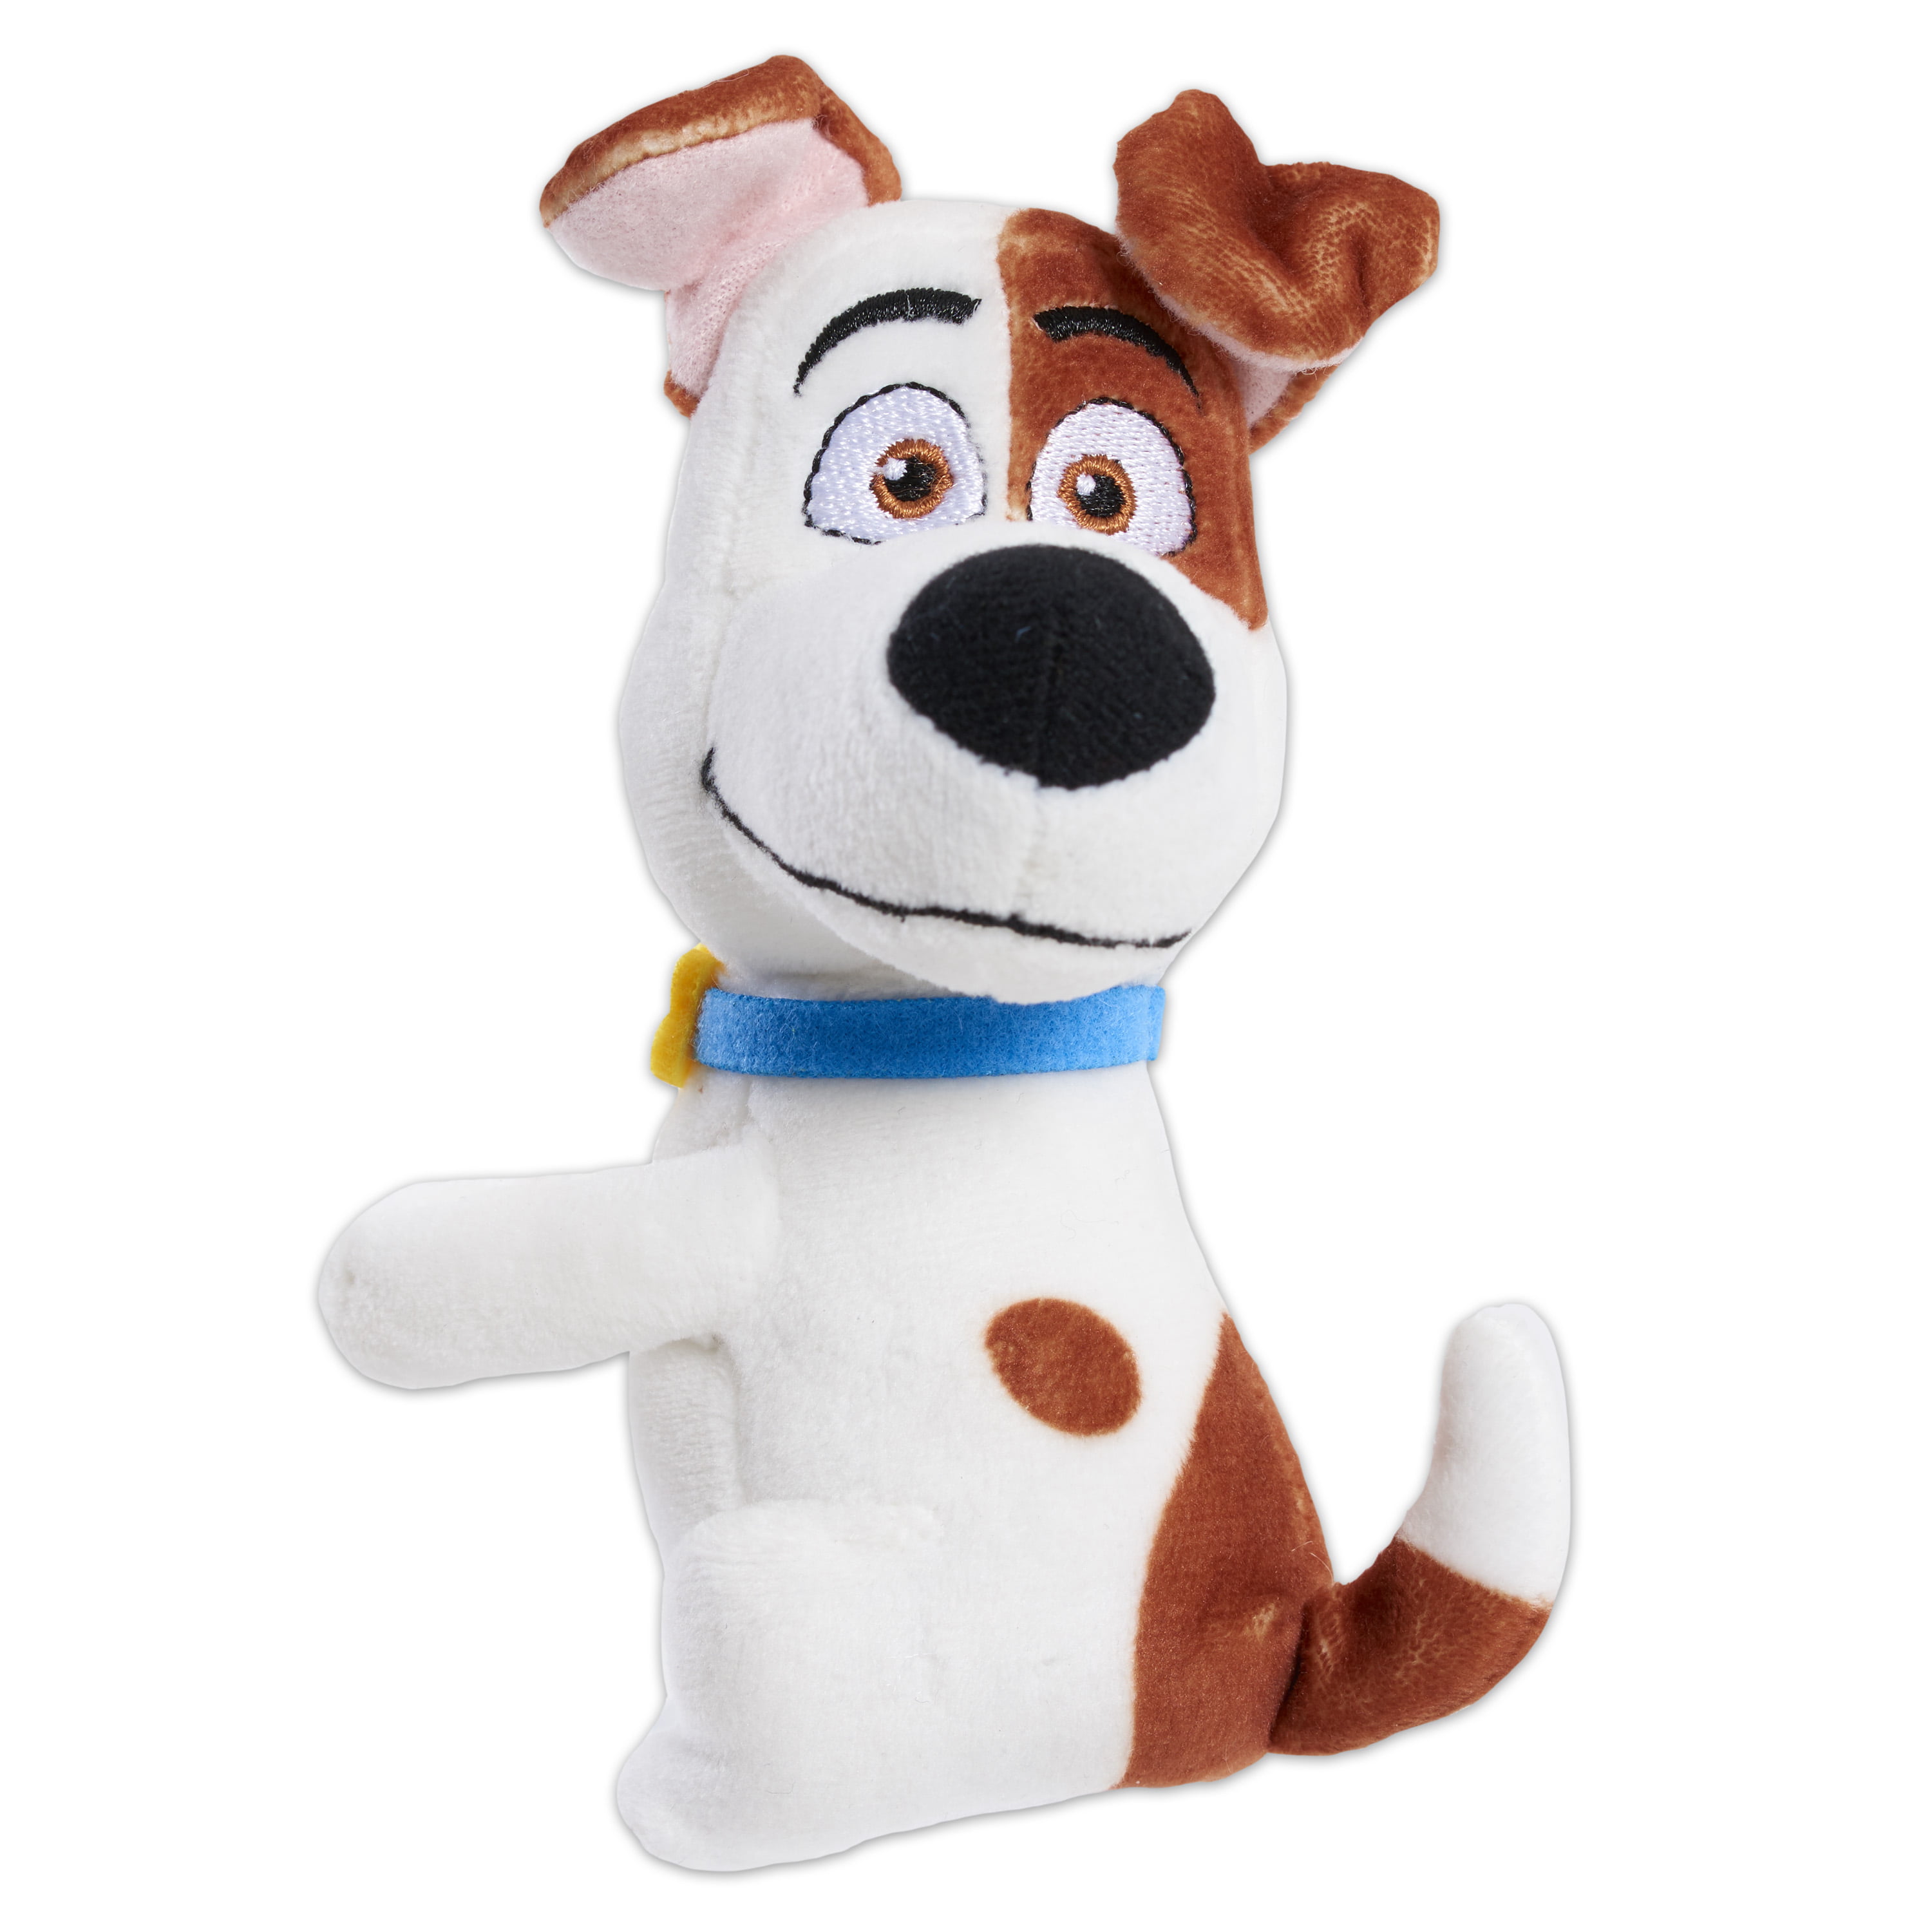 NEW OFFICIAL 12"  SECRET LIFE OF PETS 2 STANDING MAX  SOFT PLUSH TOY AND MUG 